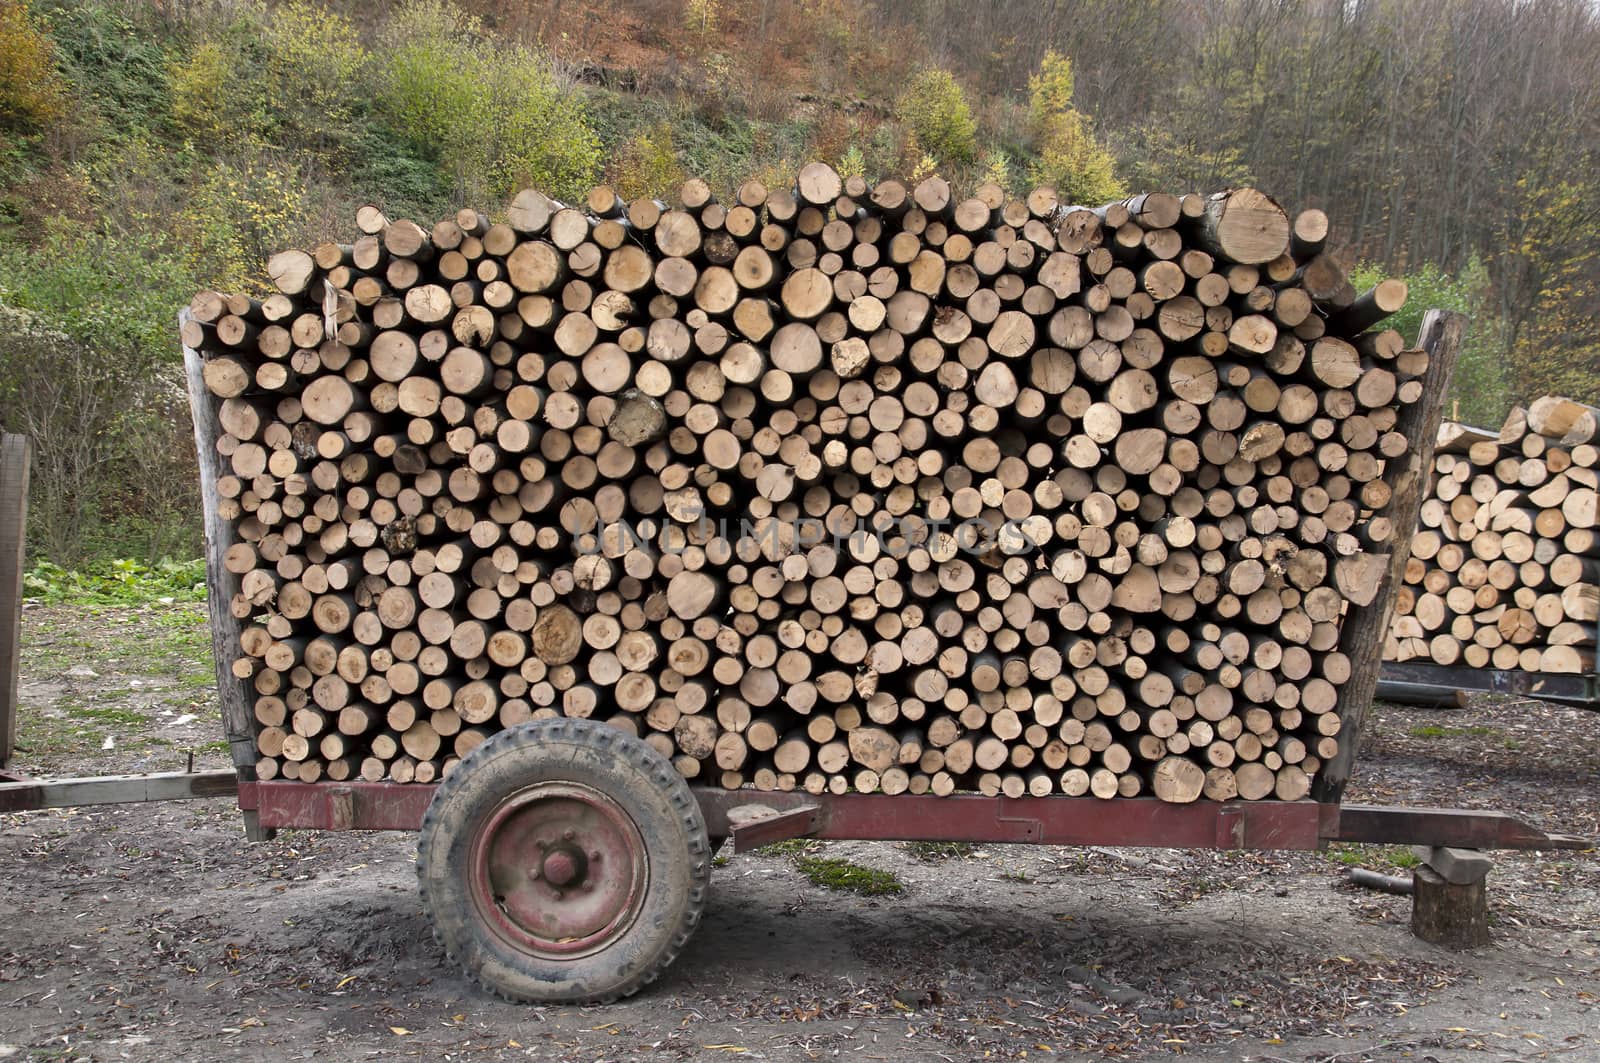 firewood on a trailer by pozezan